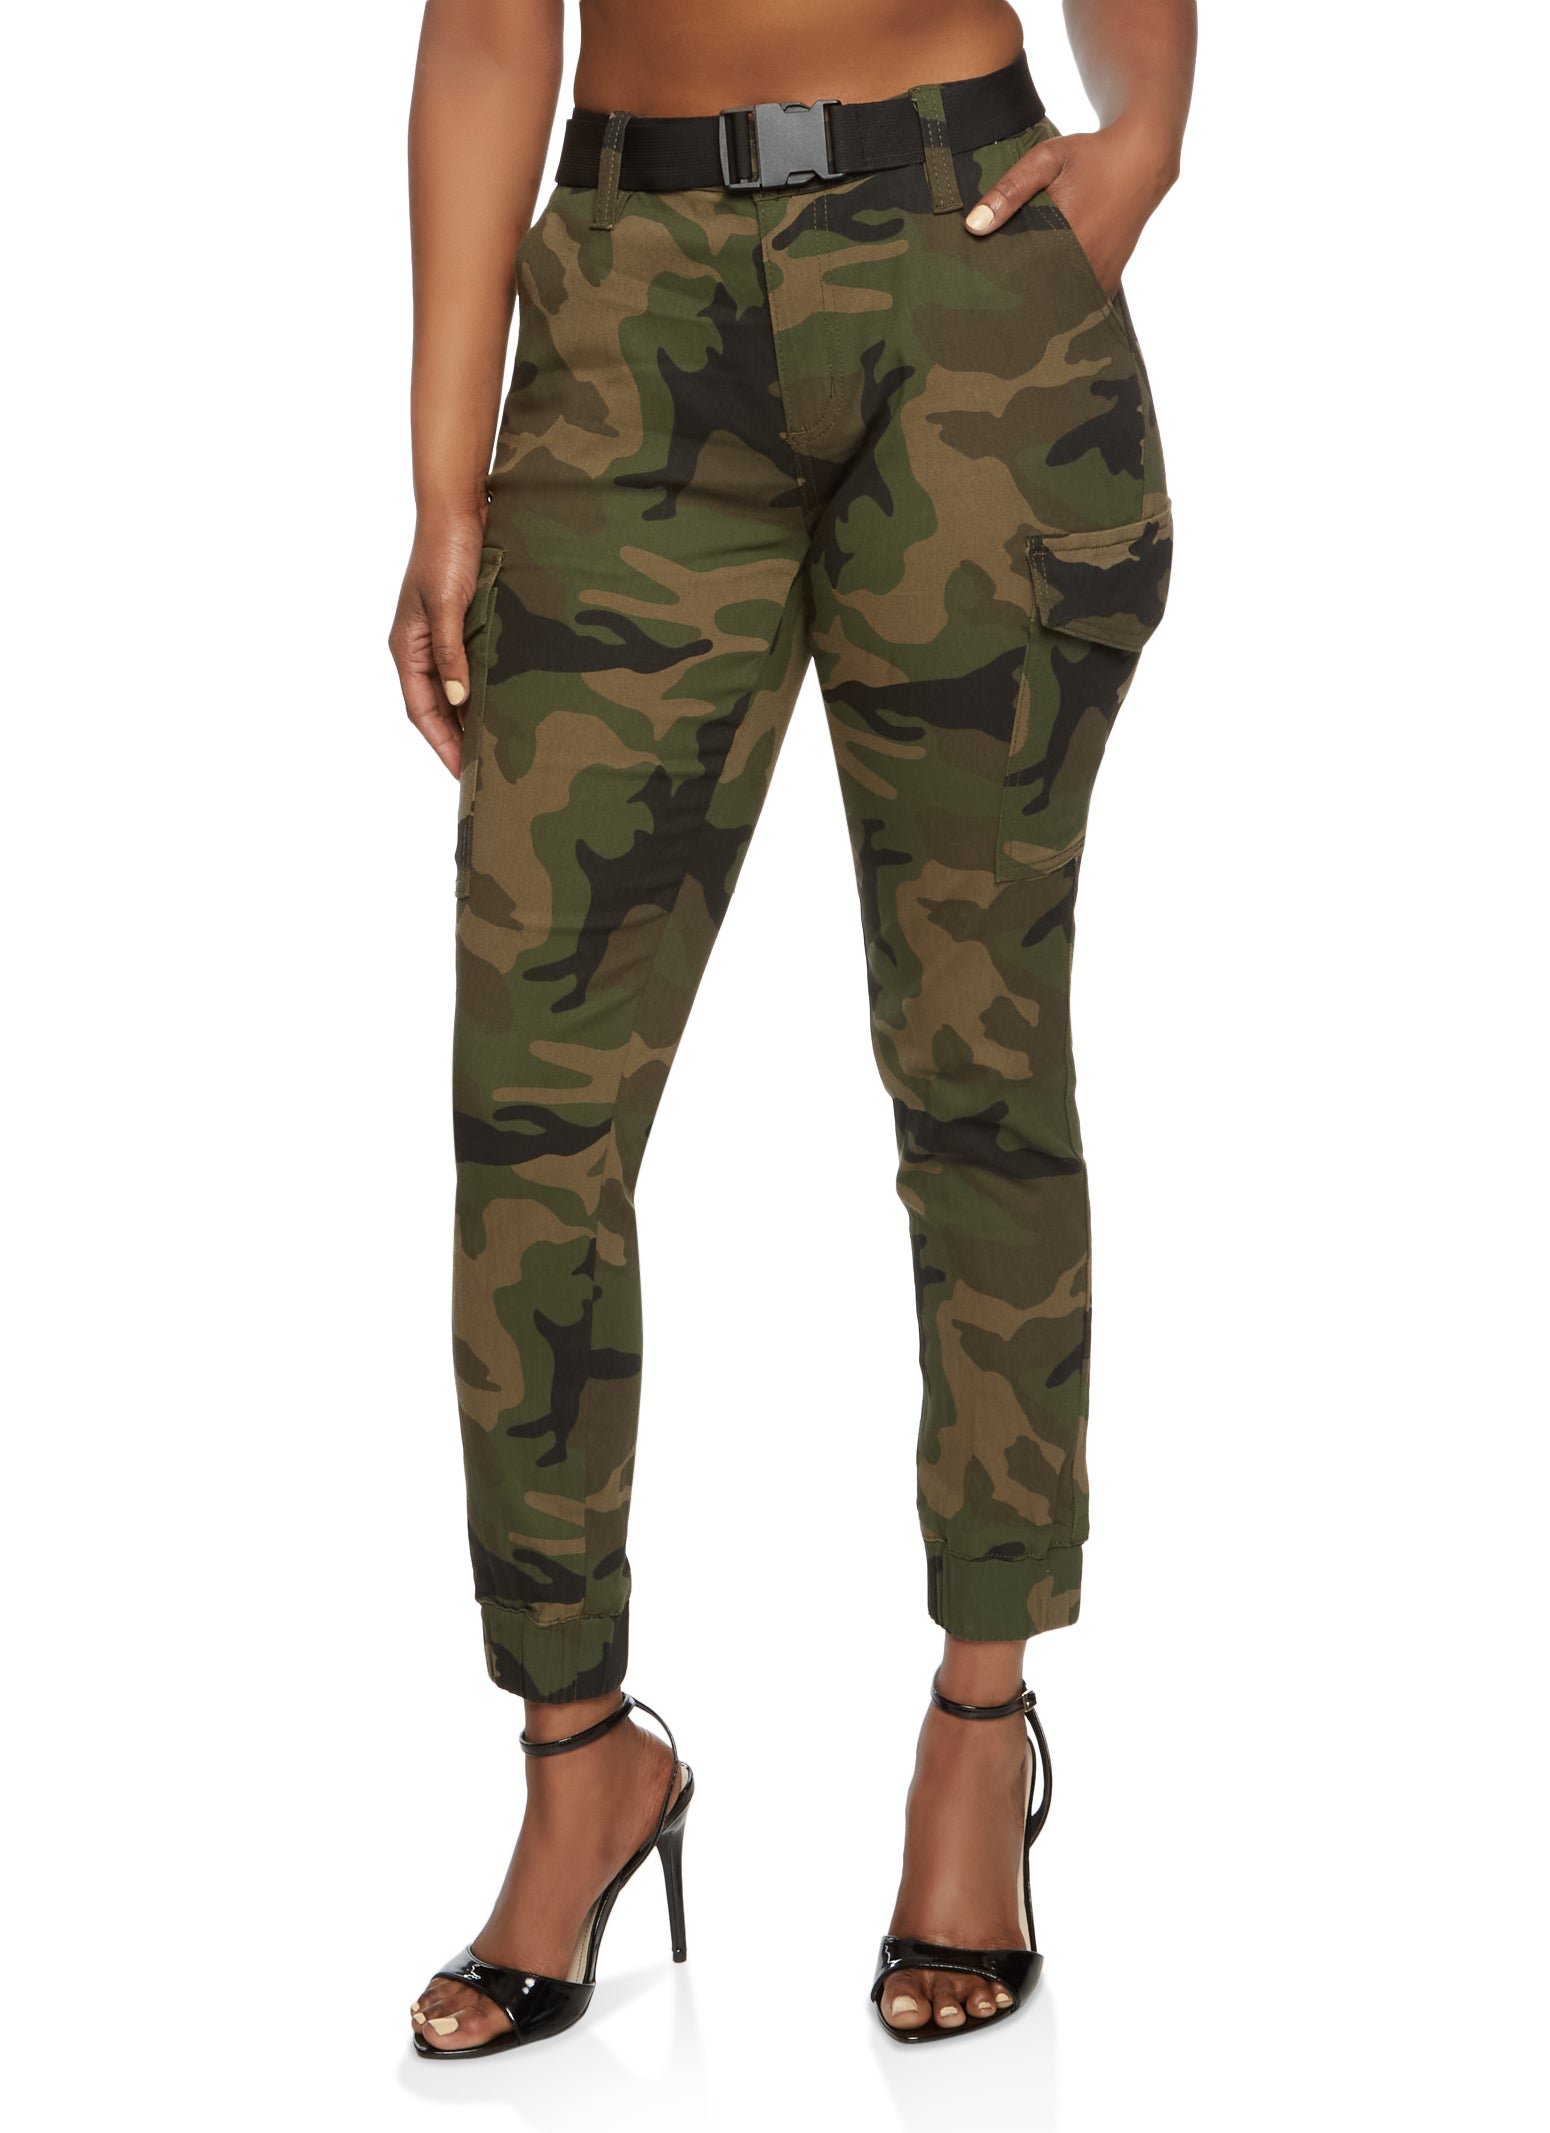 Release Buckle Belted Camo Pants